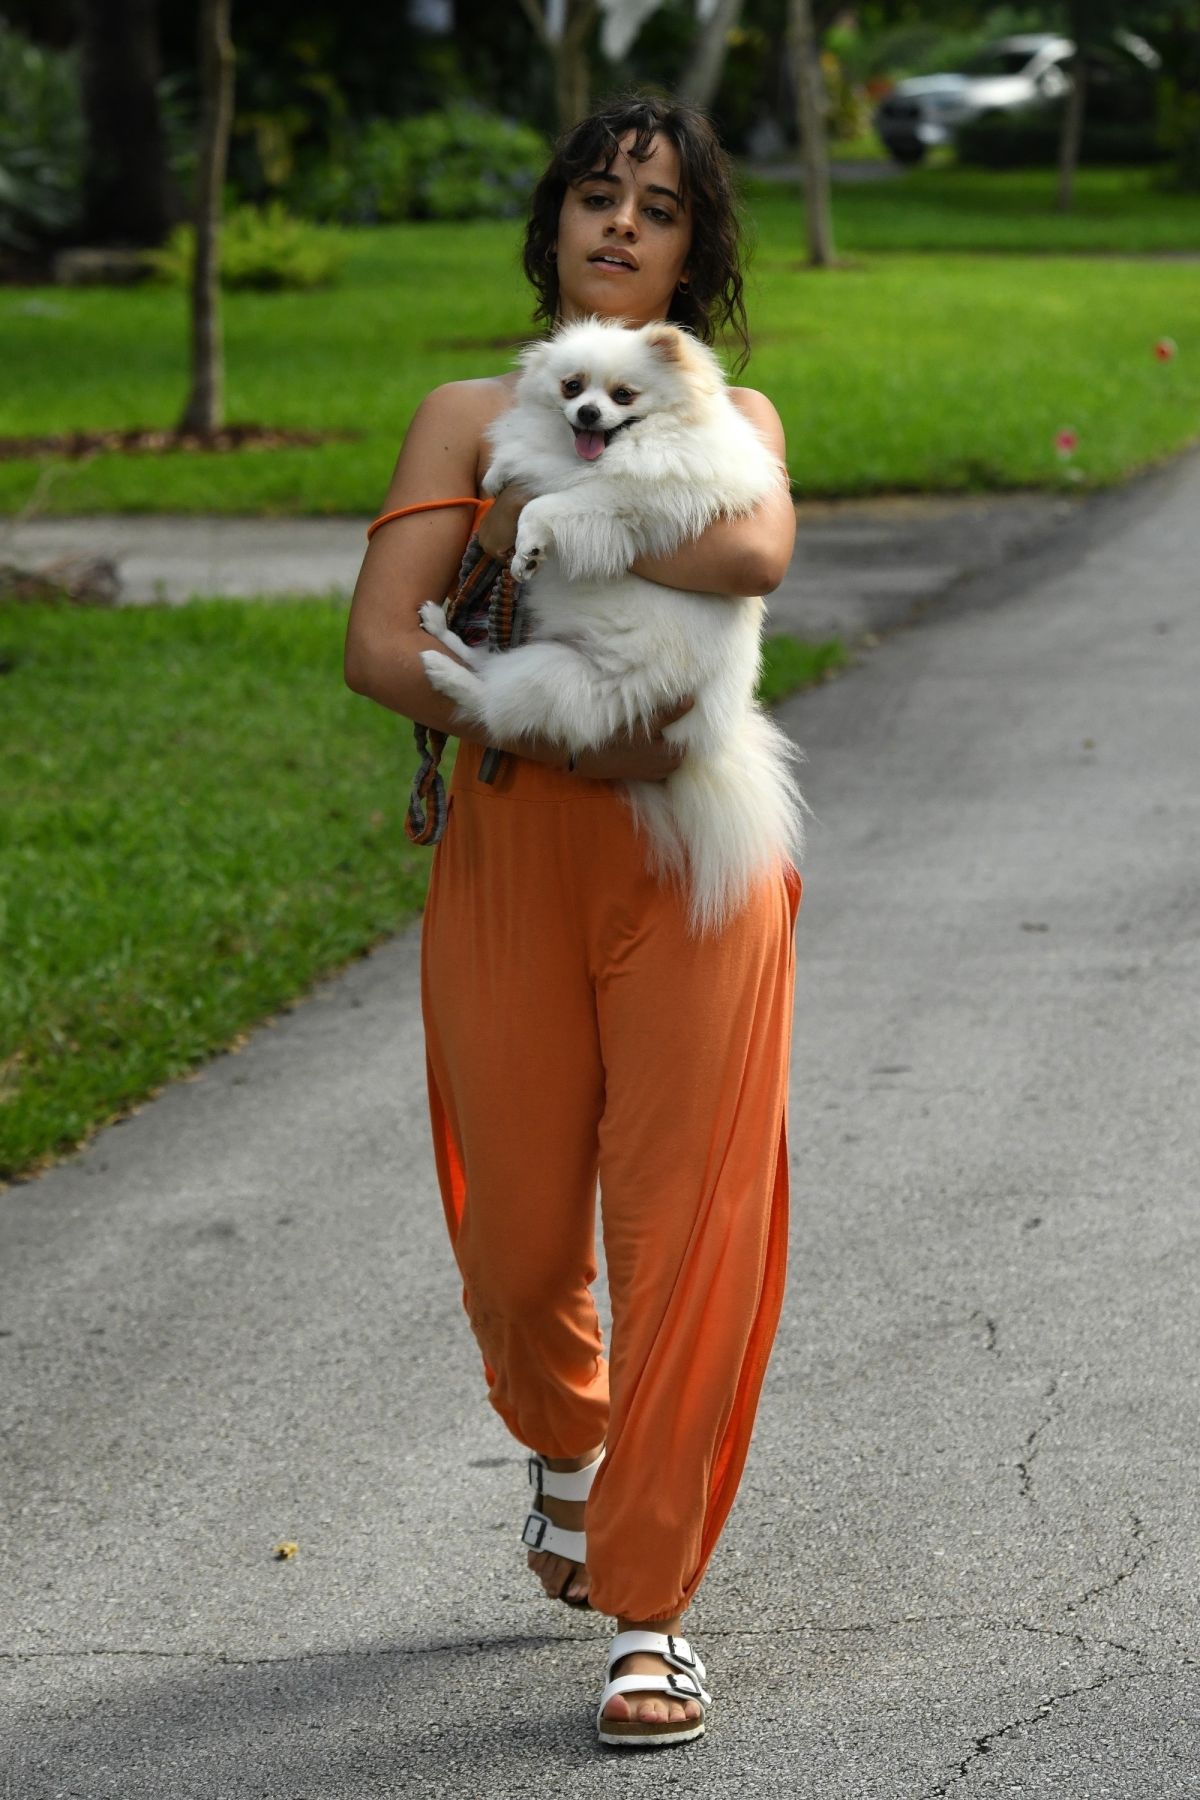 camila-cabello-out-with-her-dogs-in-miami-10-31-2020-9.jpg